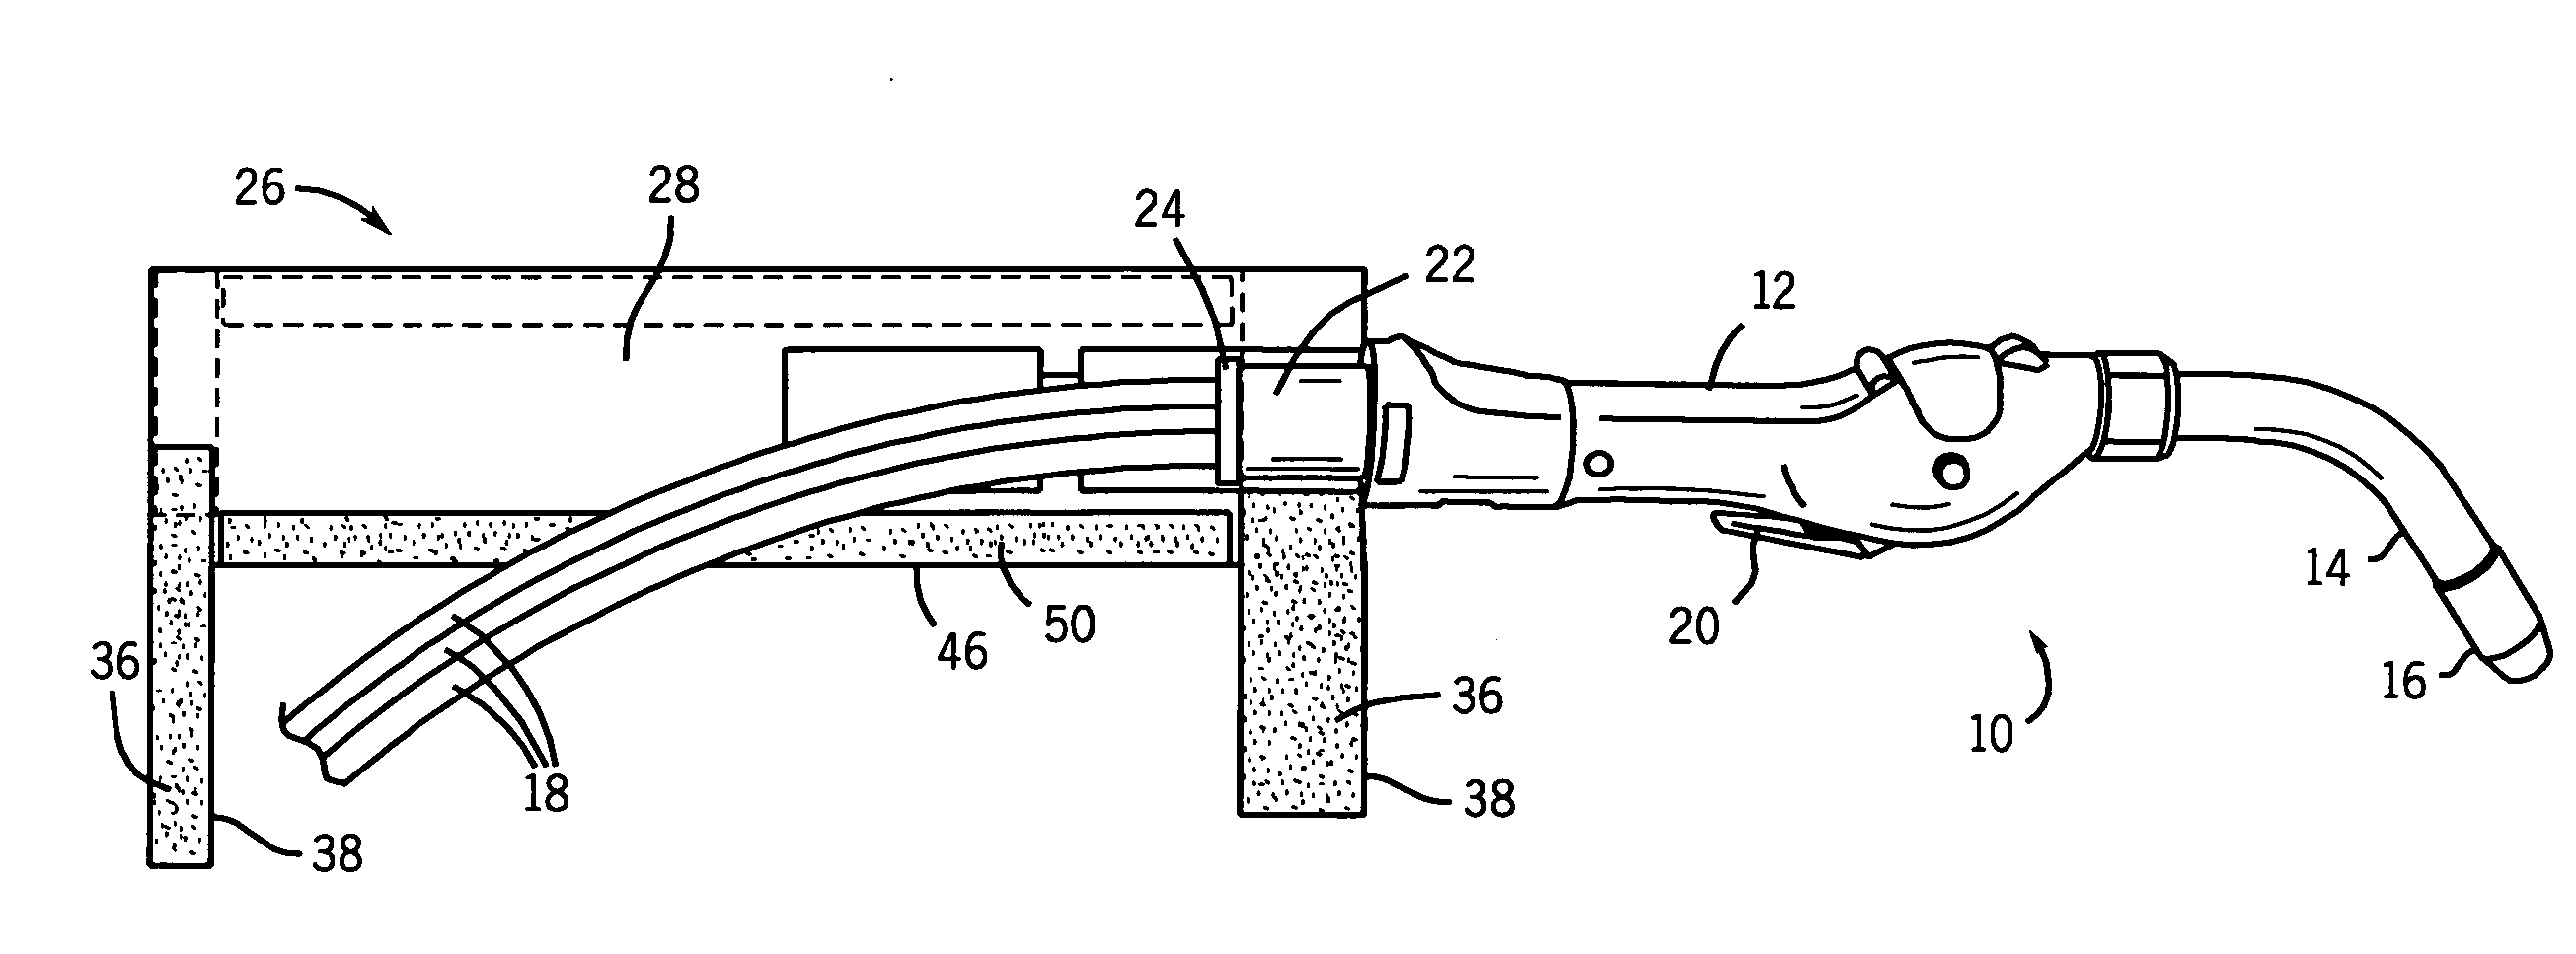 Welding torch cable strain relief system and method